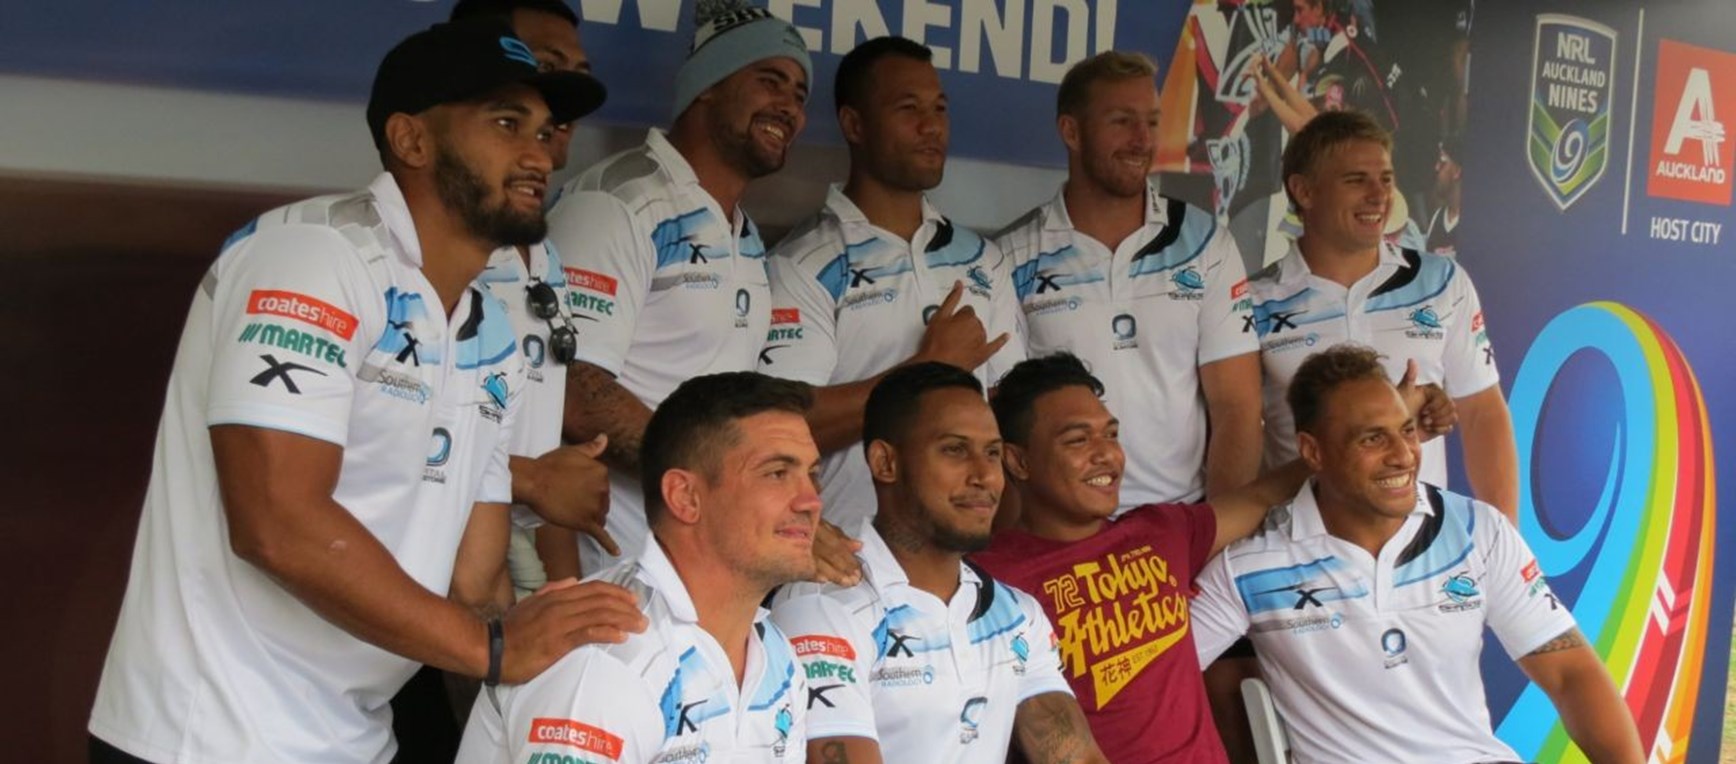 FAN DAY | Shots from Aotea Square